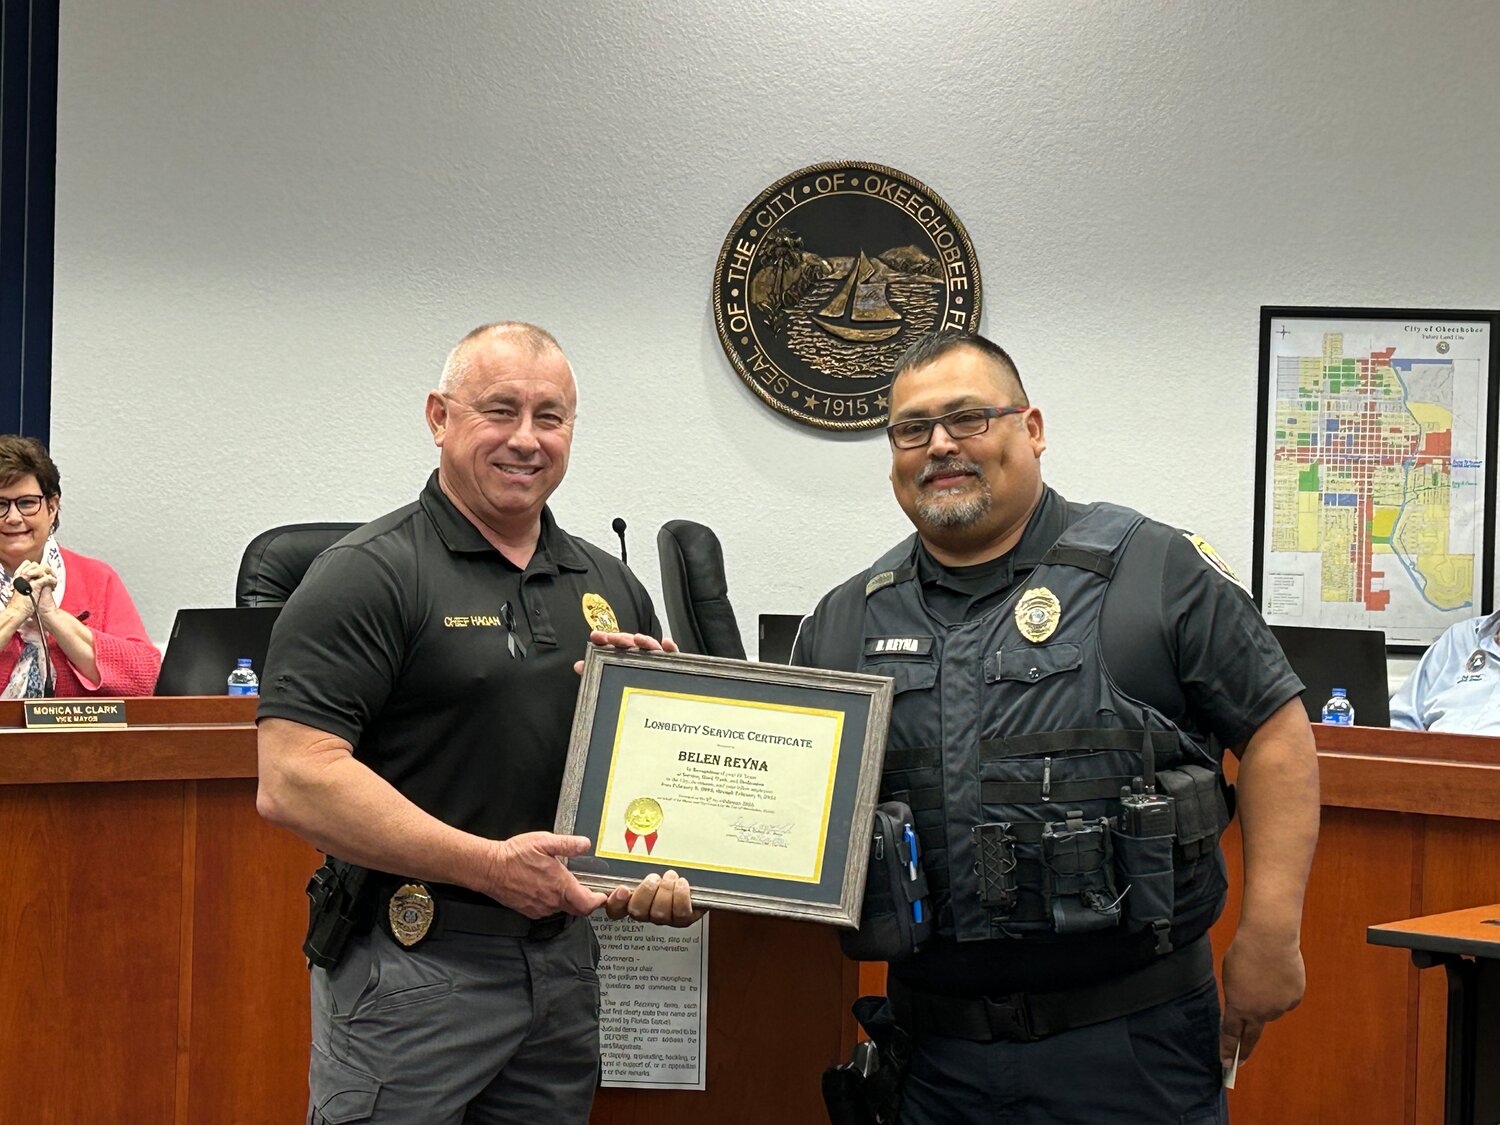 During the Feb. 6 Okeechobee City Council meeting, Okeechobee City Police Lieutenant Beylen Reyna was presented with a longevity for 20 years of service to the city of Okeechobee. The lieutenant is pictured with Police Chief Donald Hagan.